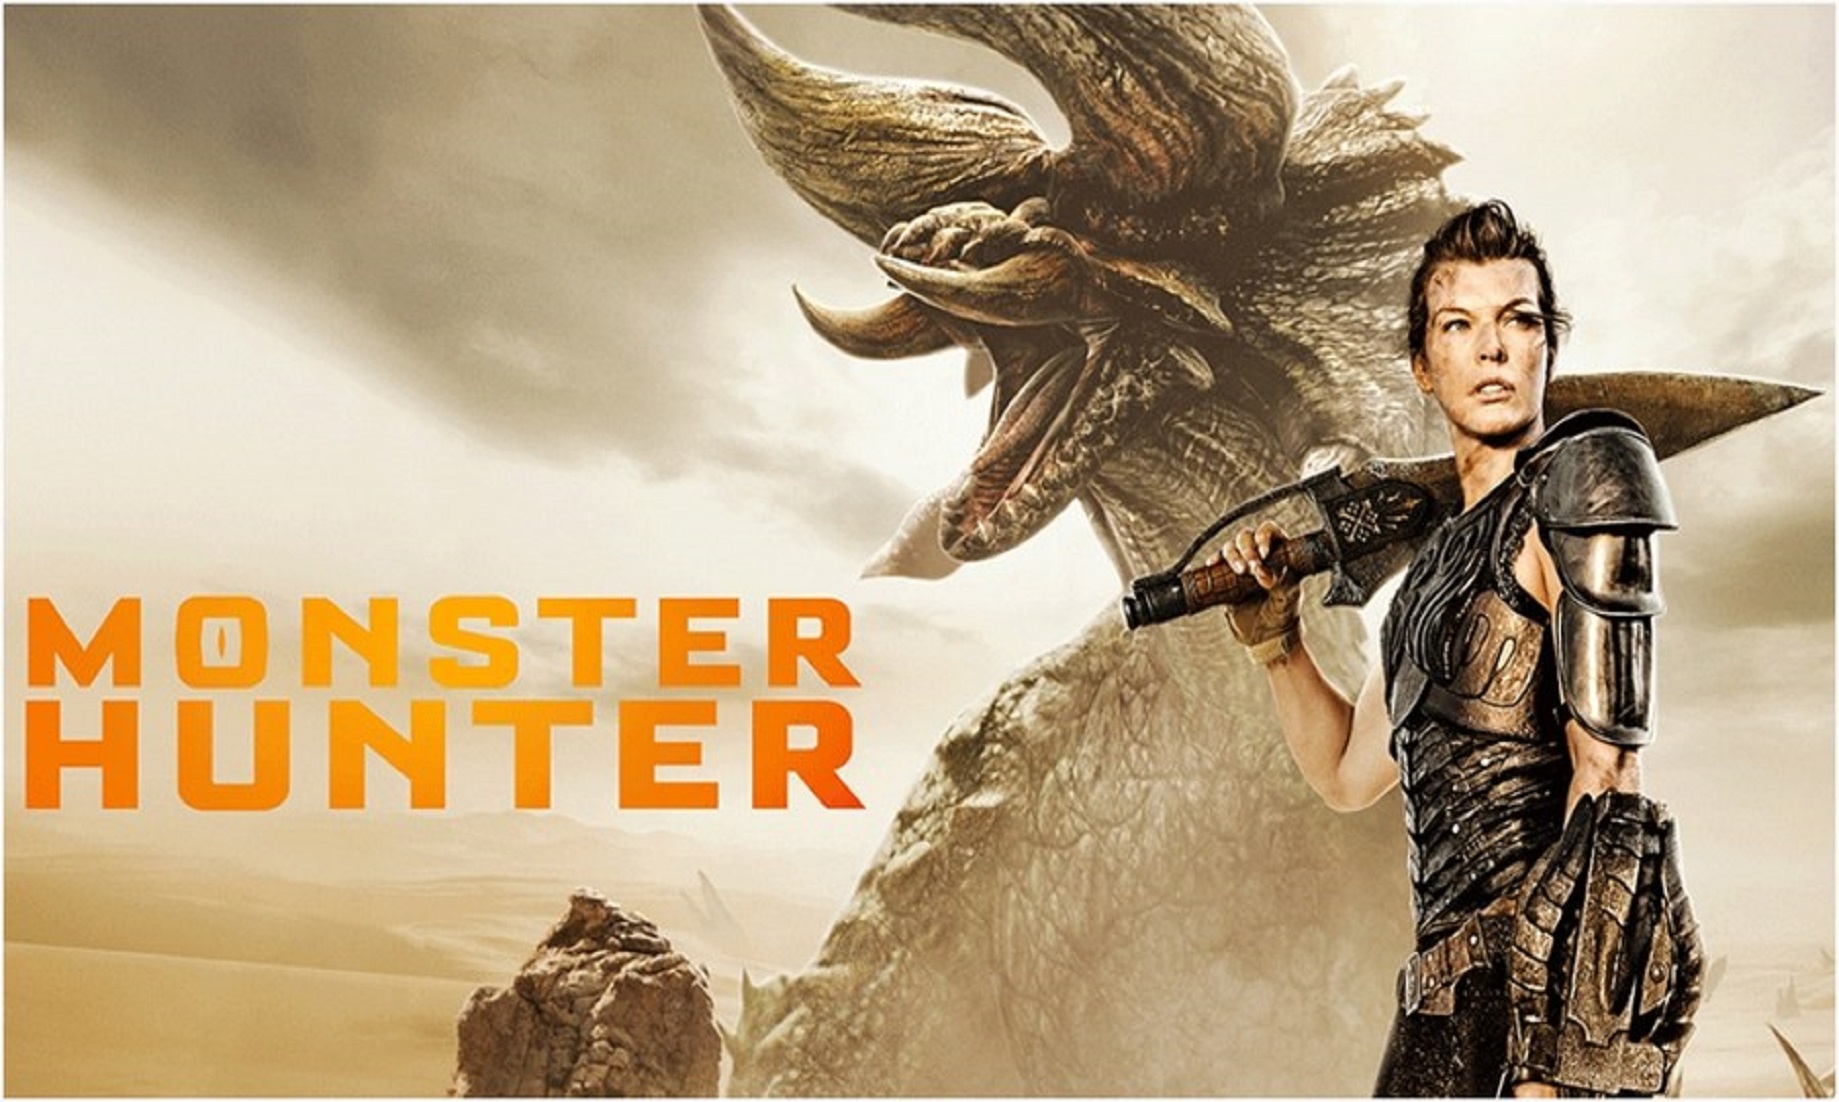 “Monster Hunter” Tops North American Box Office In Opening Weekend